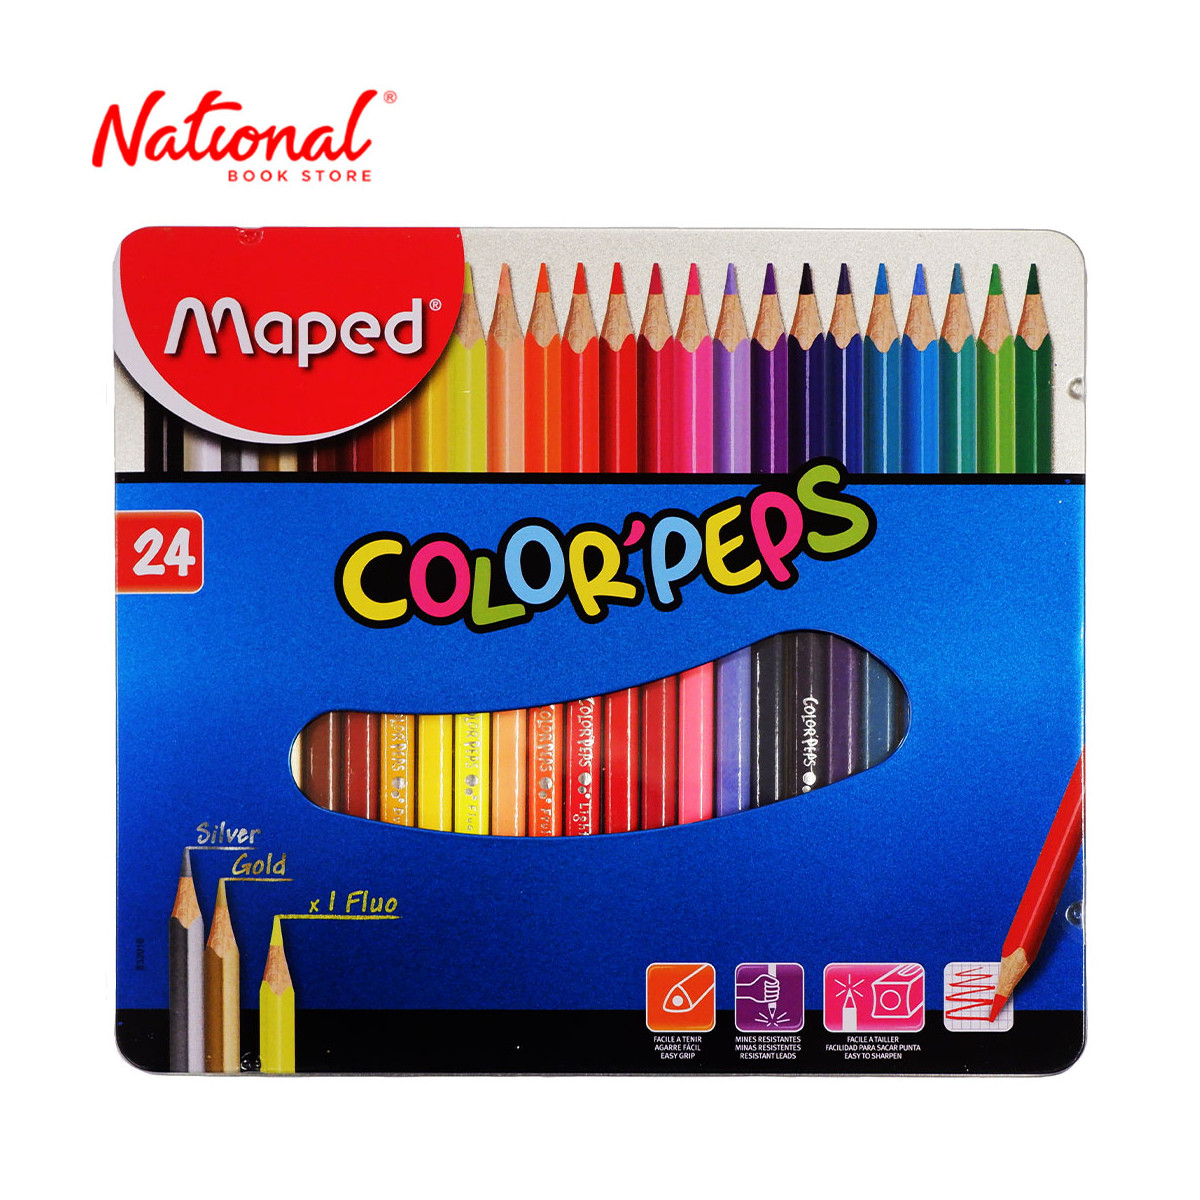 MAPED COLOR'PEPS CLASSIC COLORED PENCIL 832016 24 COLORS IN METAL CASE